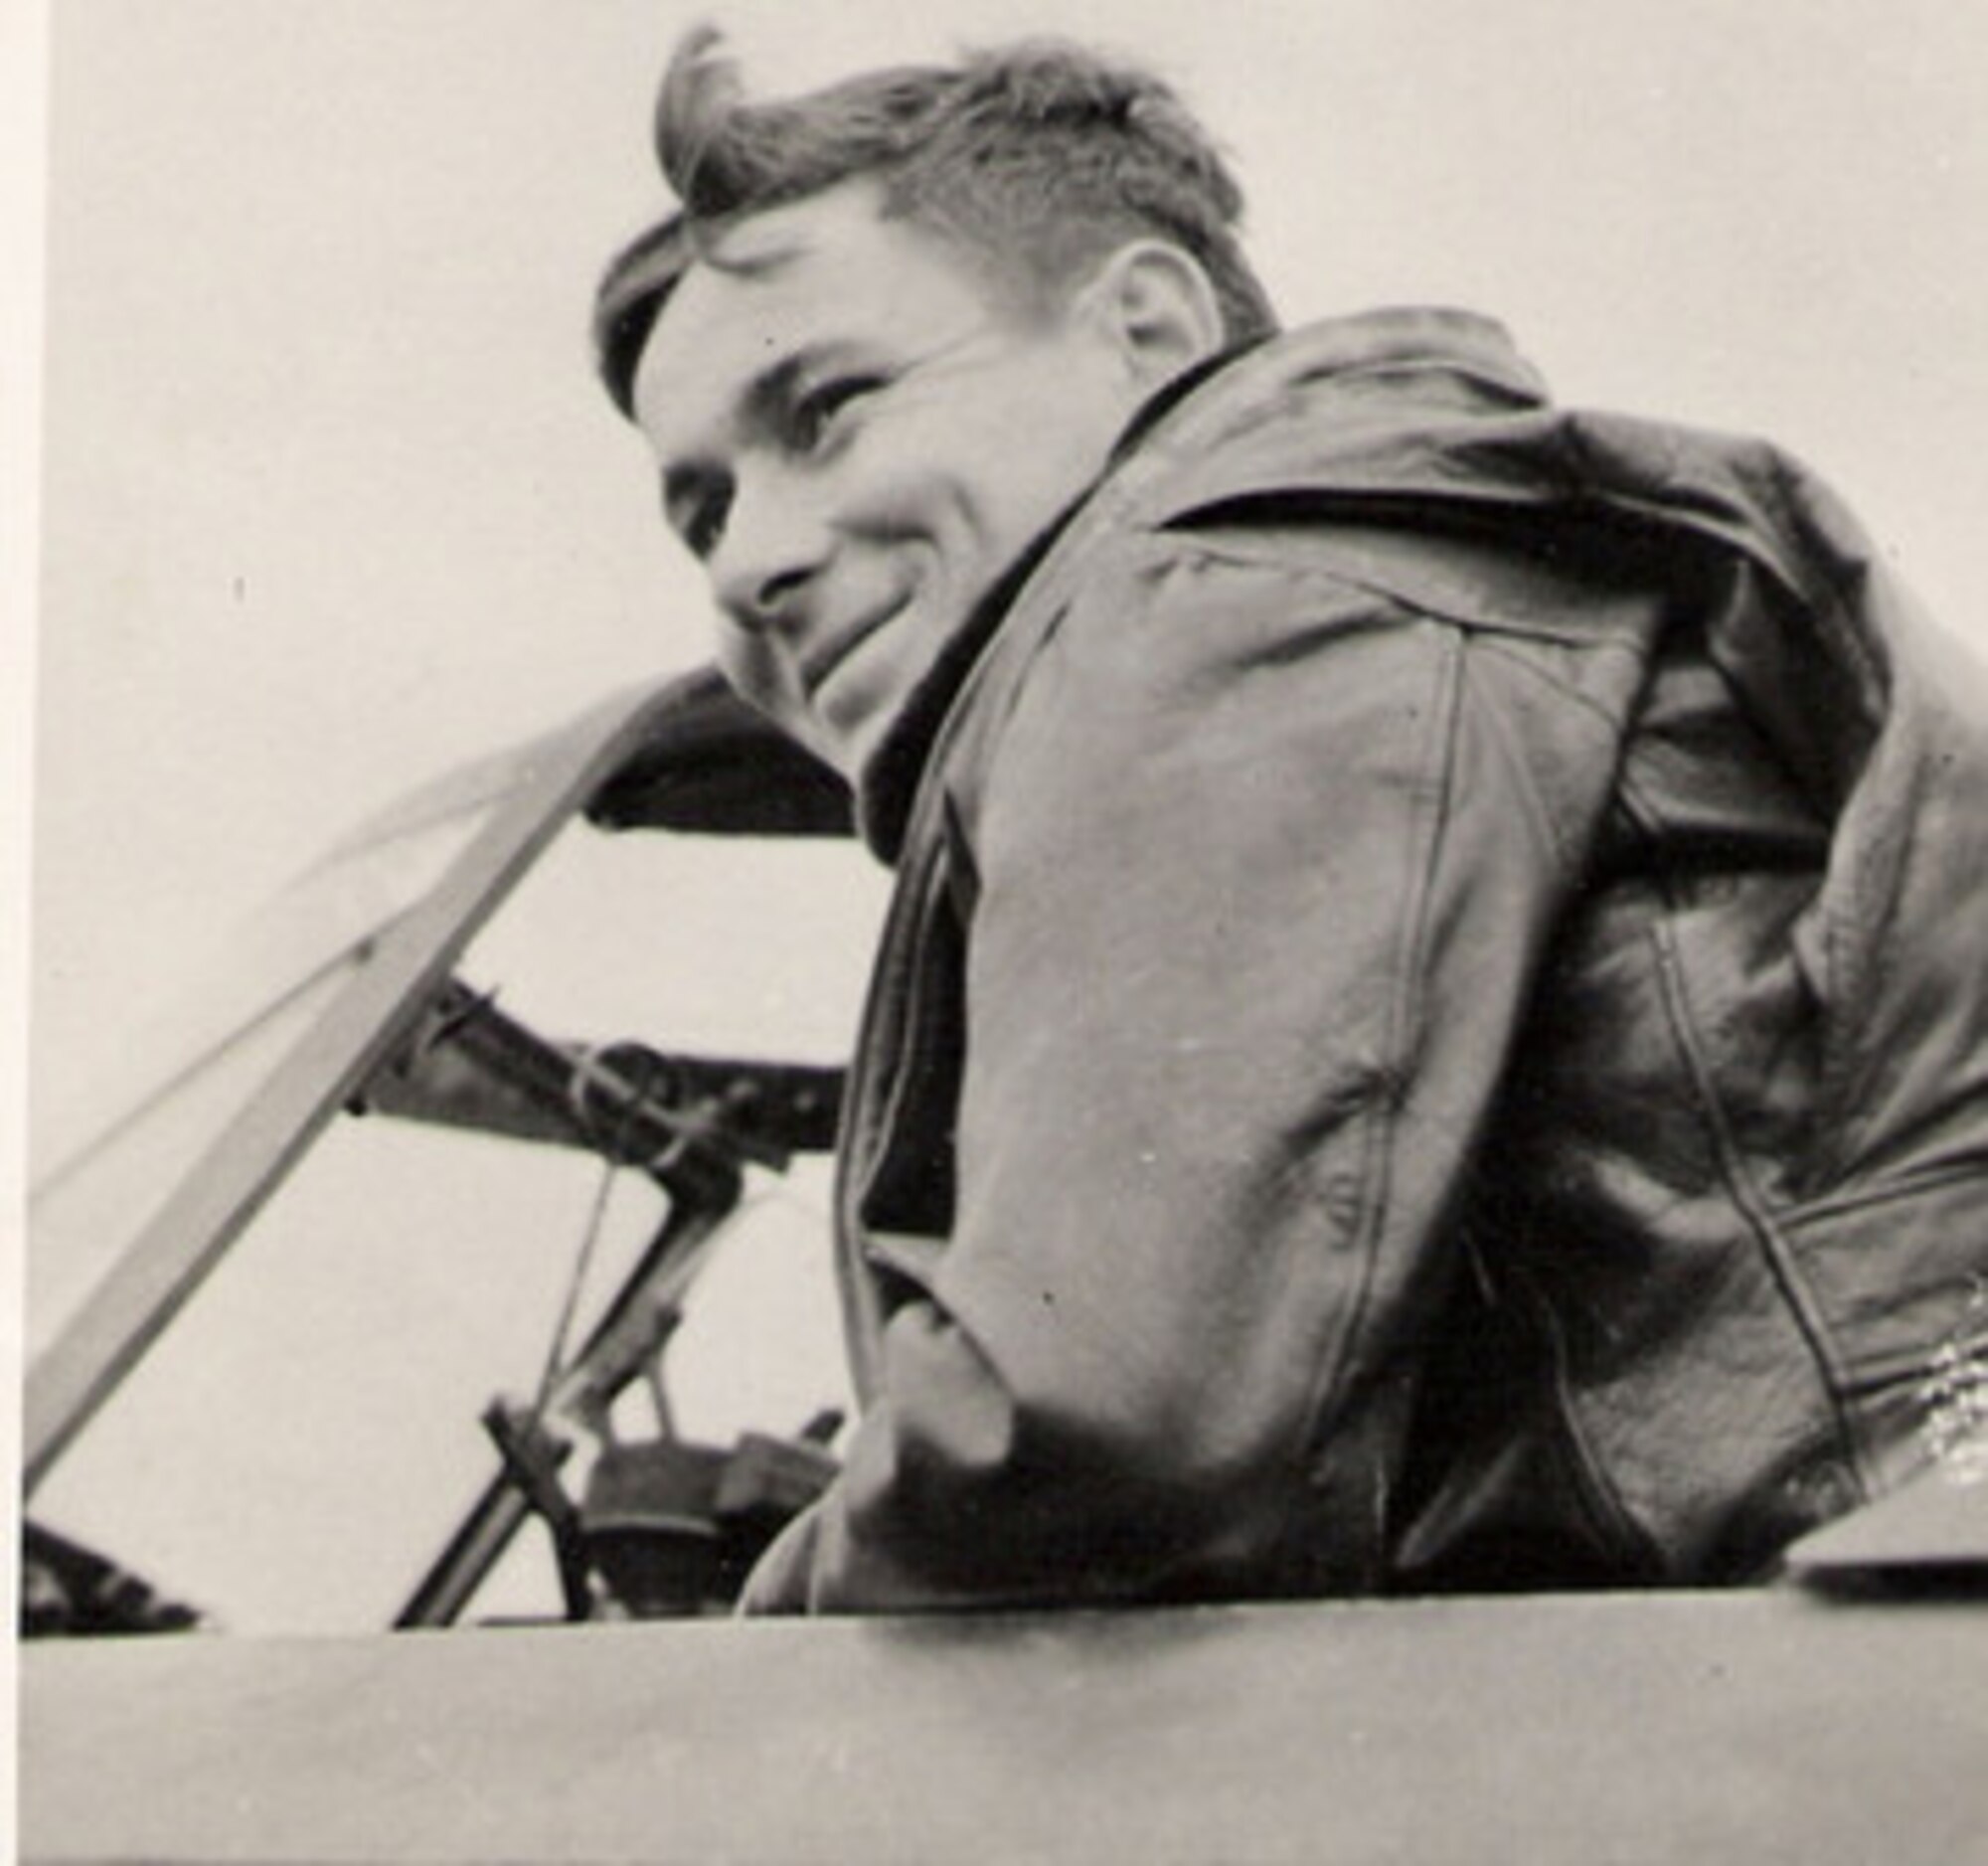 Major John W. Leonard, Commanding Officer of the 405th Fighter Squadron, pictured here in 1944, was a well-regarded combat leader in the 371st Fighter Group and led missions to help the Lost Battalion.  Unfortunately, he was fatally wounded in a dogfight with German fighters near Worms, Germany, in January, 1945.  His older brother William was a distinguished Navy fighter pilot and ace in the Pacific. Source: (Courtesy Mr. Jürg Herzig, Stand Where They Fought website, used with permission)   
